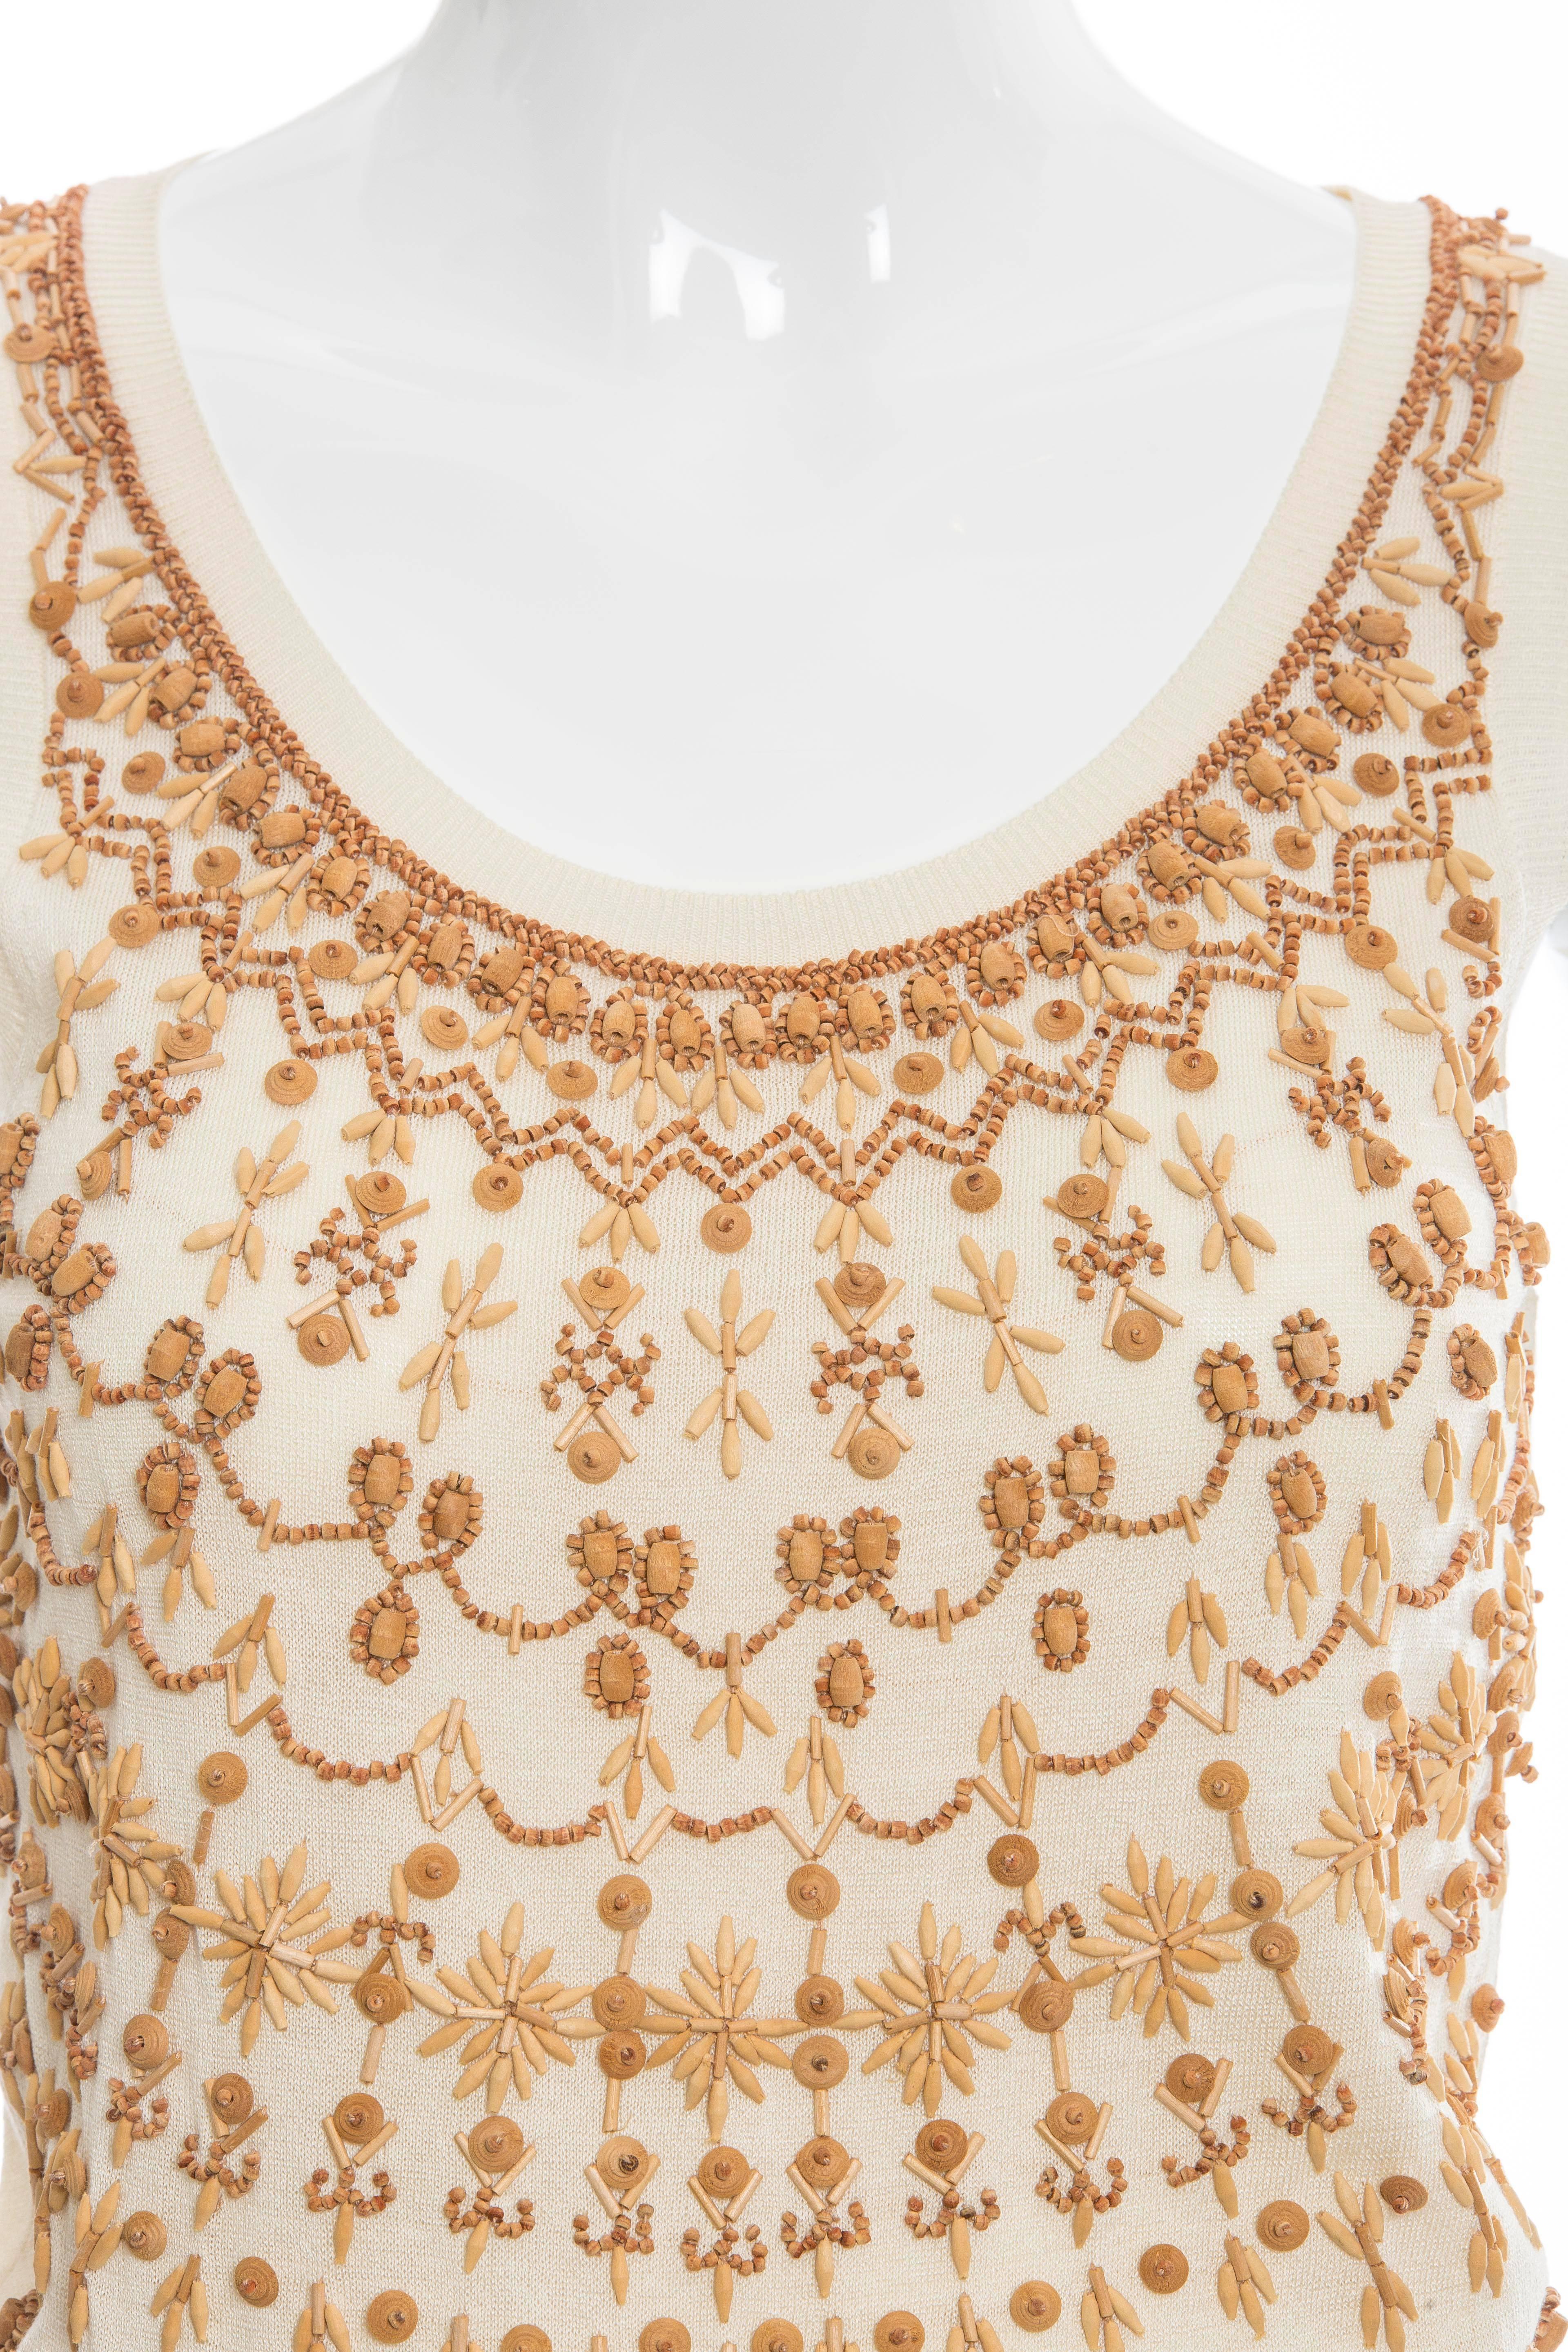 Women's Alexander McQueen Cream Cotton Silk Tank Embroidered Wood Beading, Spring 2006 For Sale